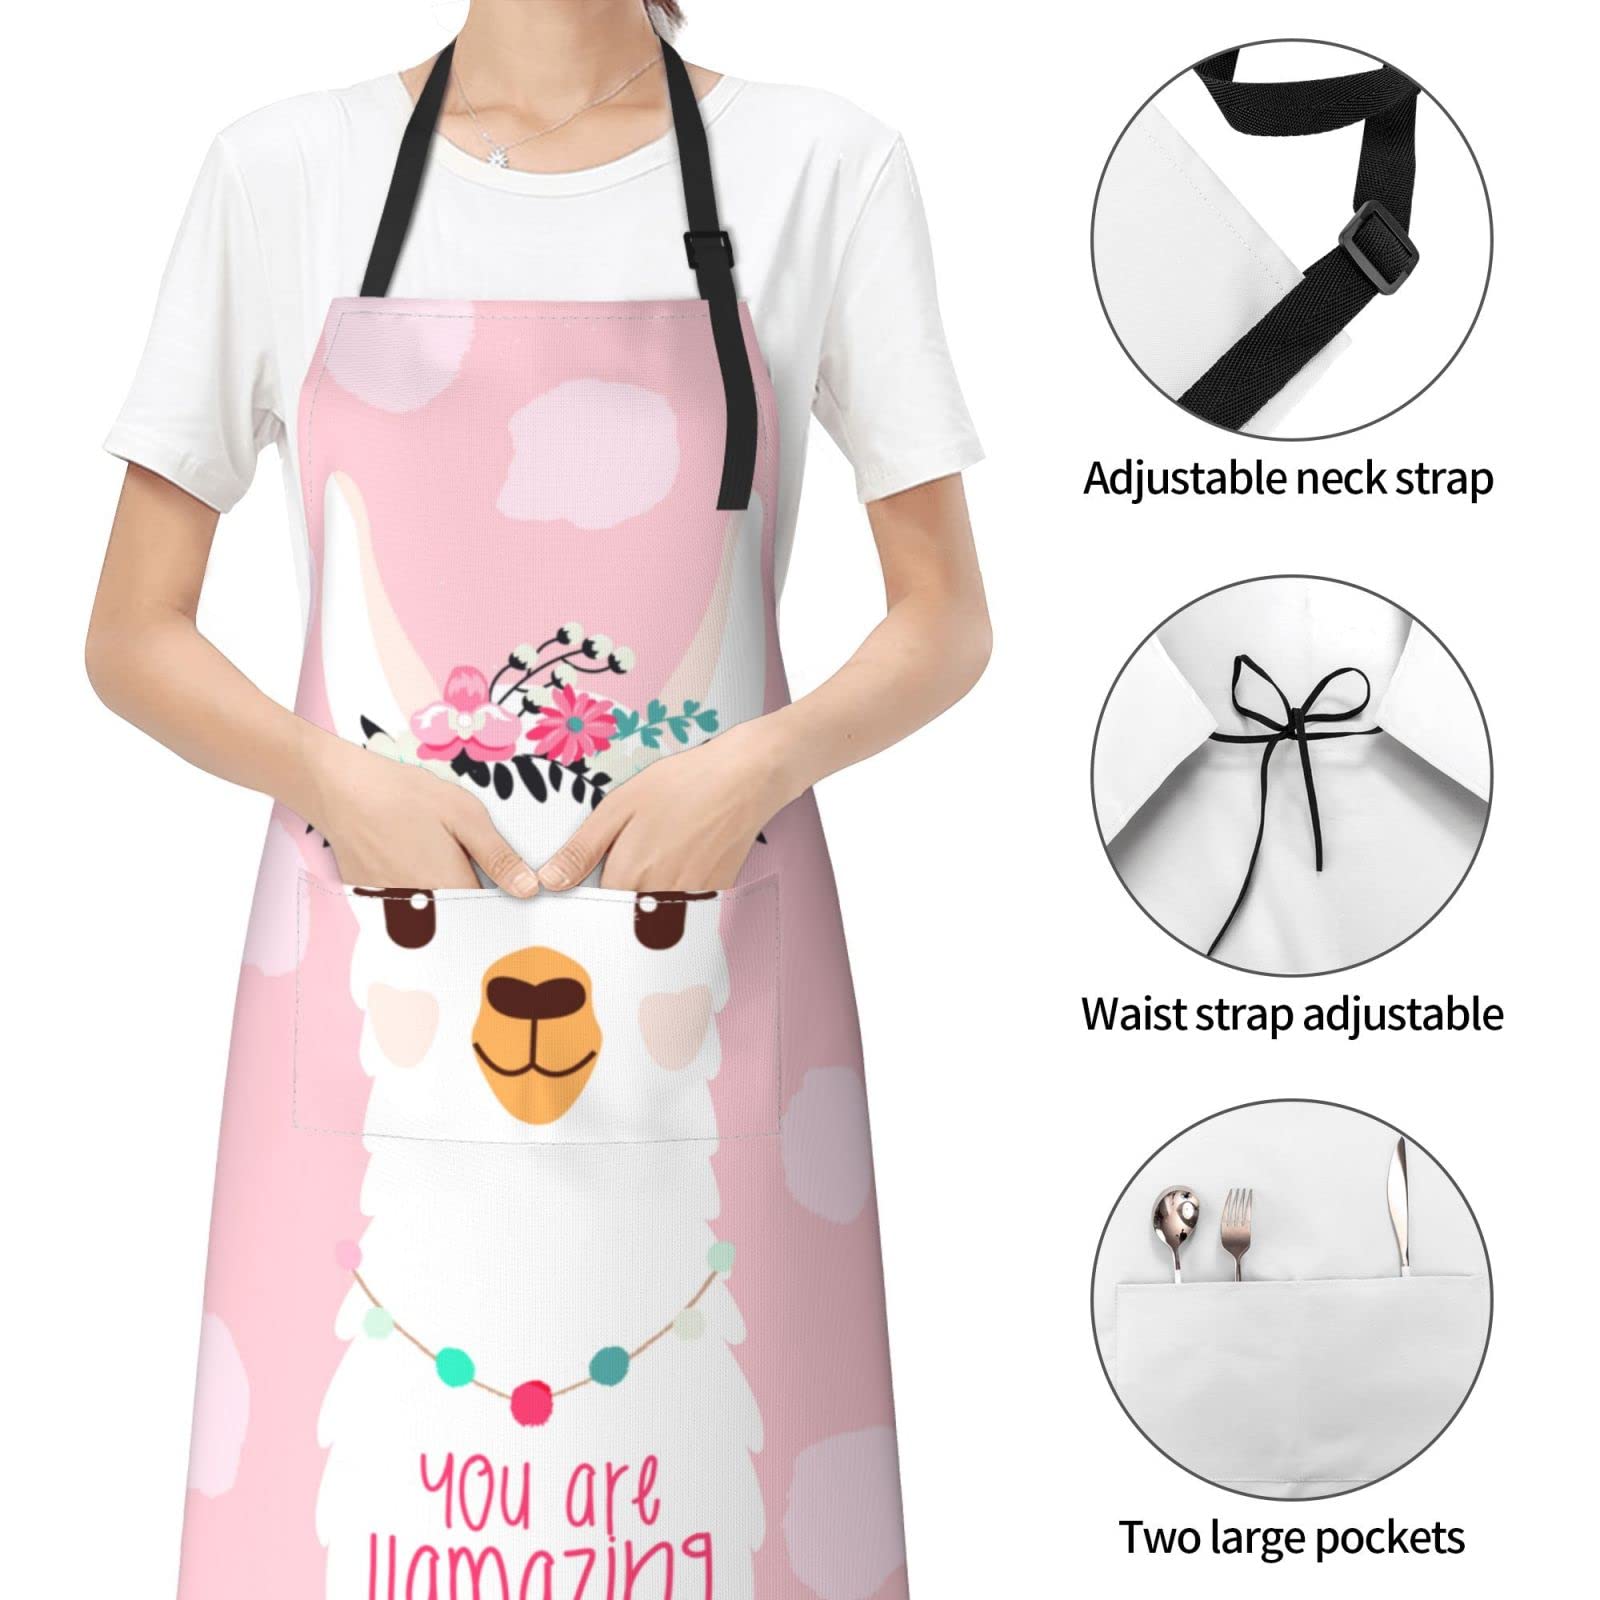 Echoserein Cute Llama Alpaca Apron Adjustable Bib Aprons With 2 Pockets For Men Women Chef Waterproof Decorative For Kitchen Cooking Bbq Grilling